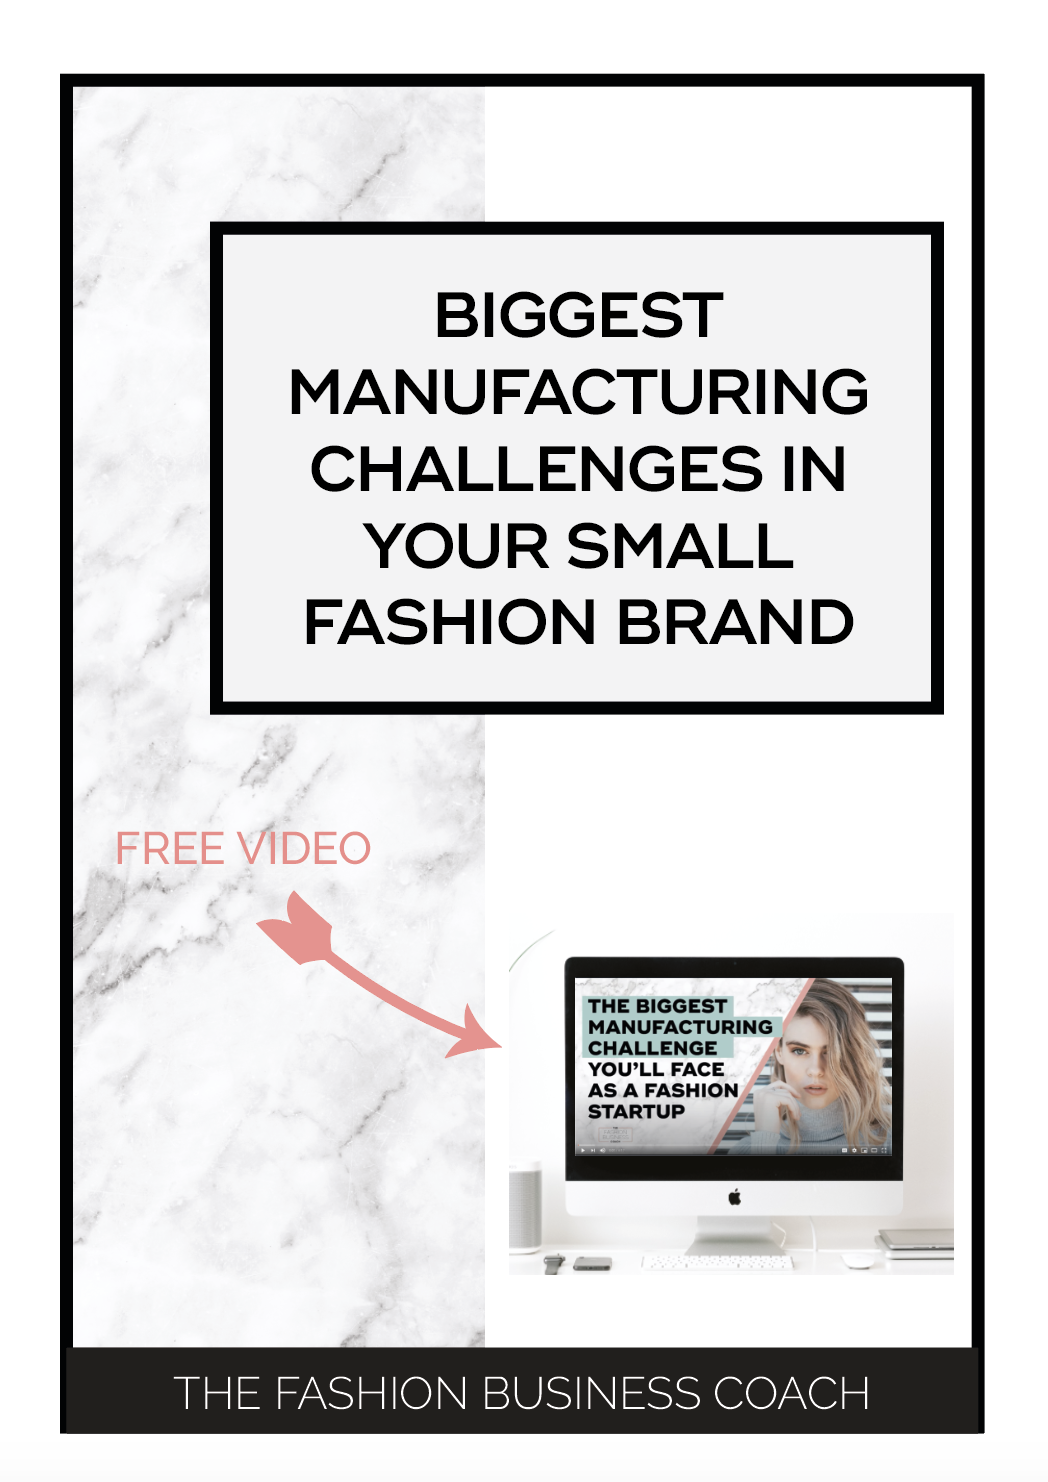 BIGGEST MANUFACTURING CHALLENGES IN YOUR SMALL FASHION BRAND 2.png